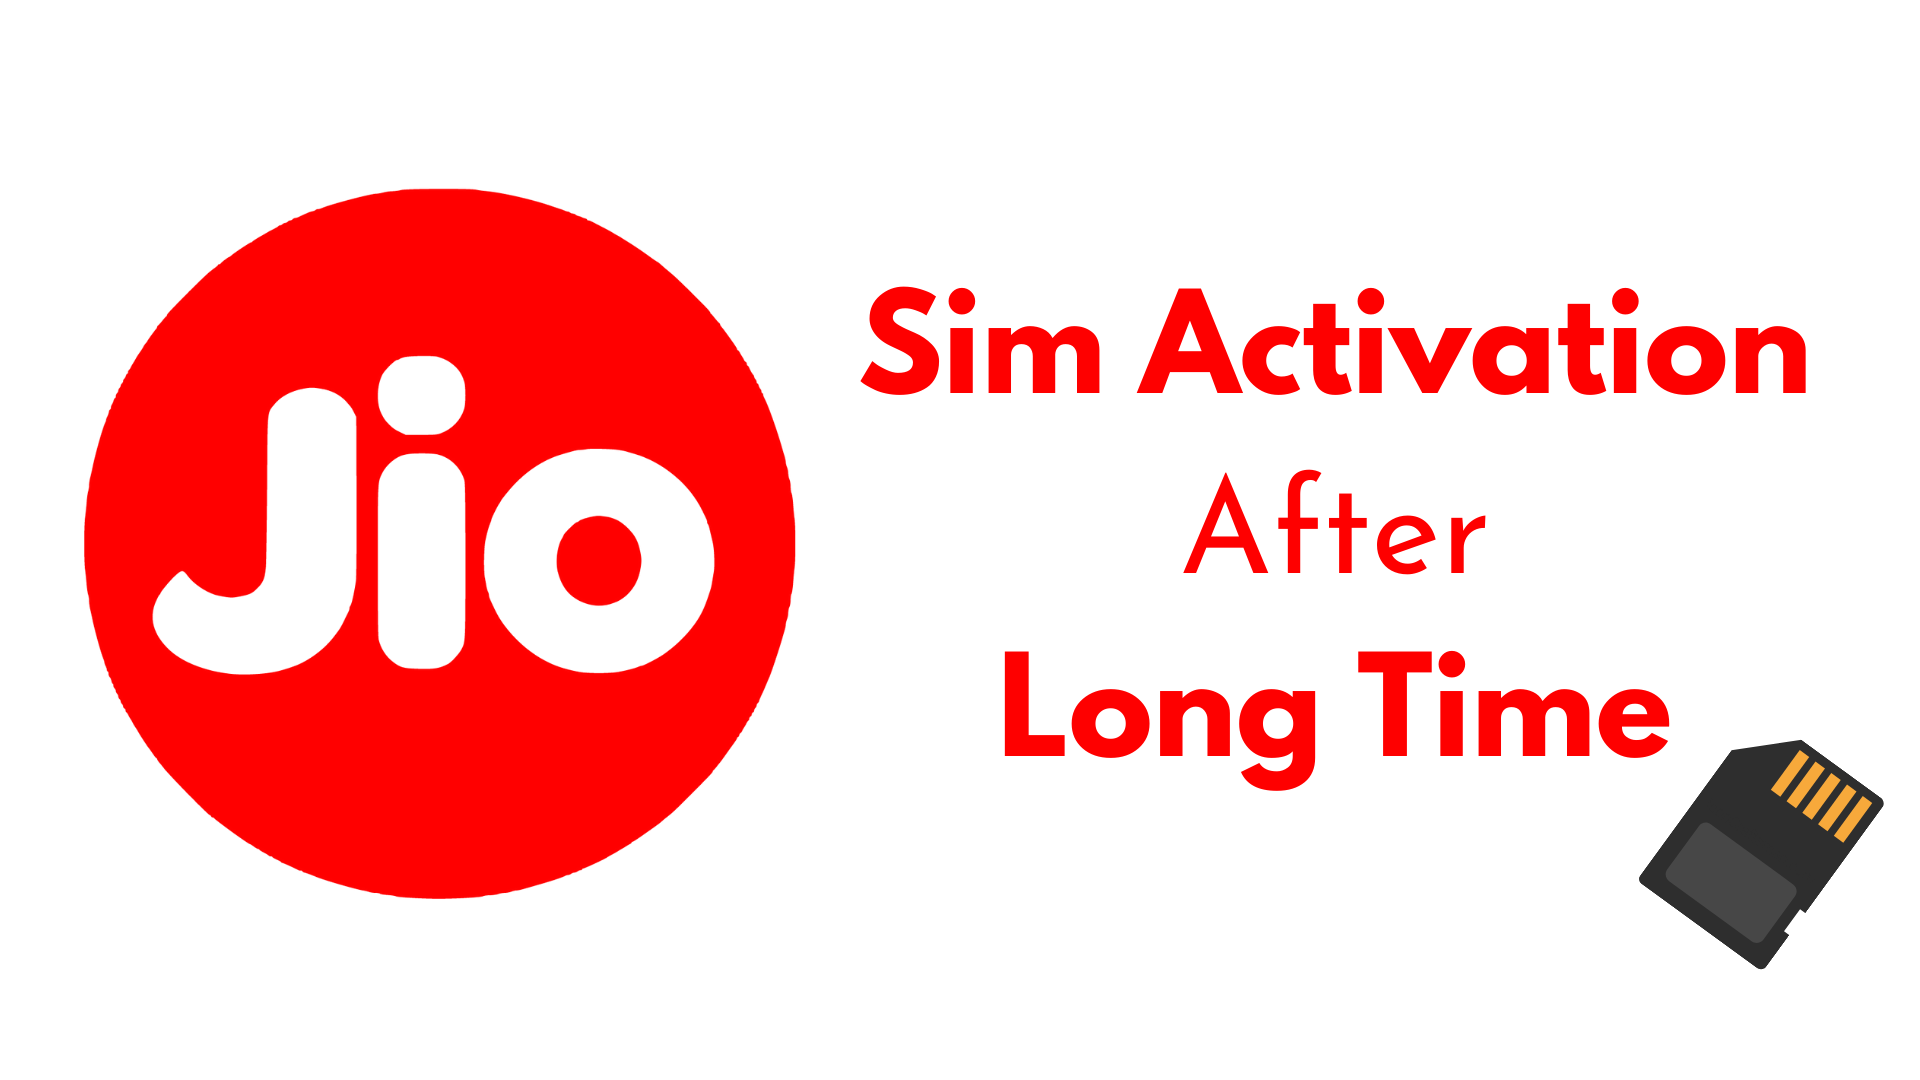 How To Activate Jio Sim After Long Time?